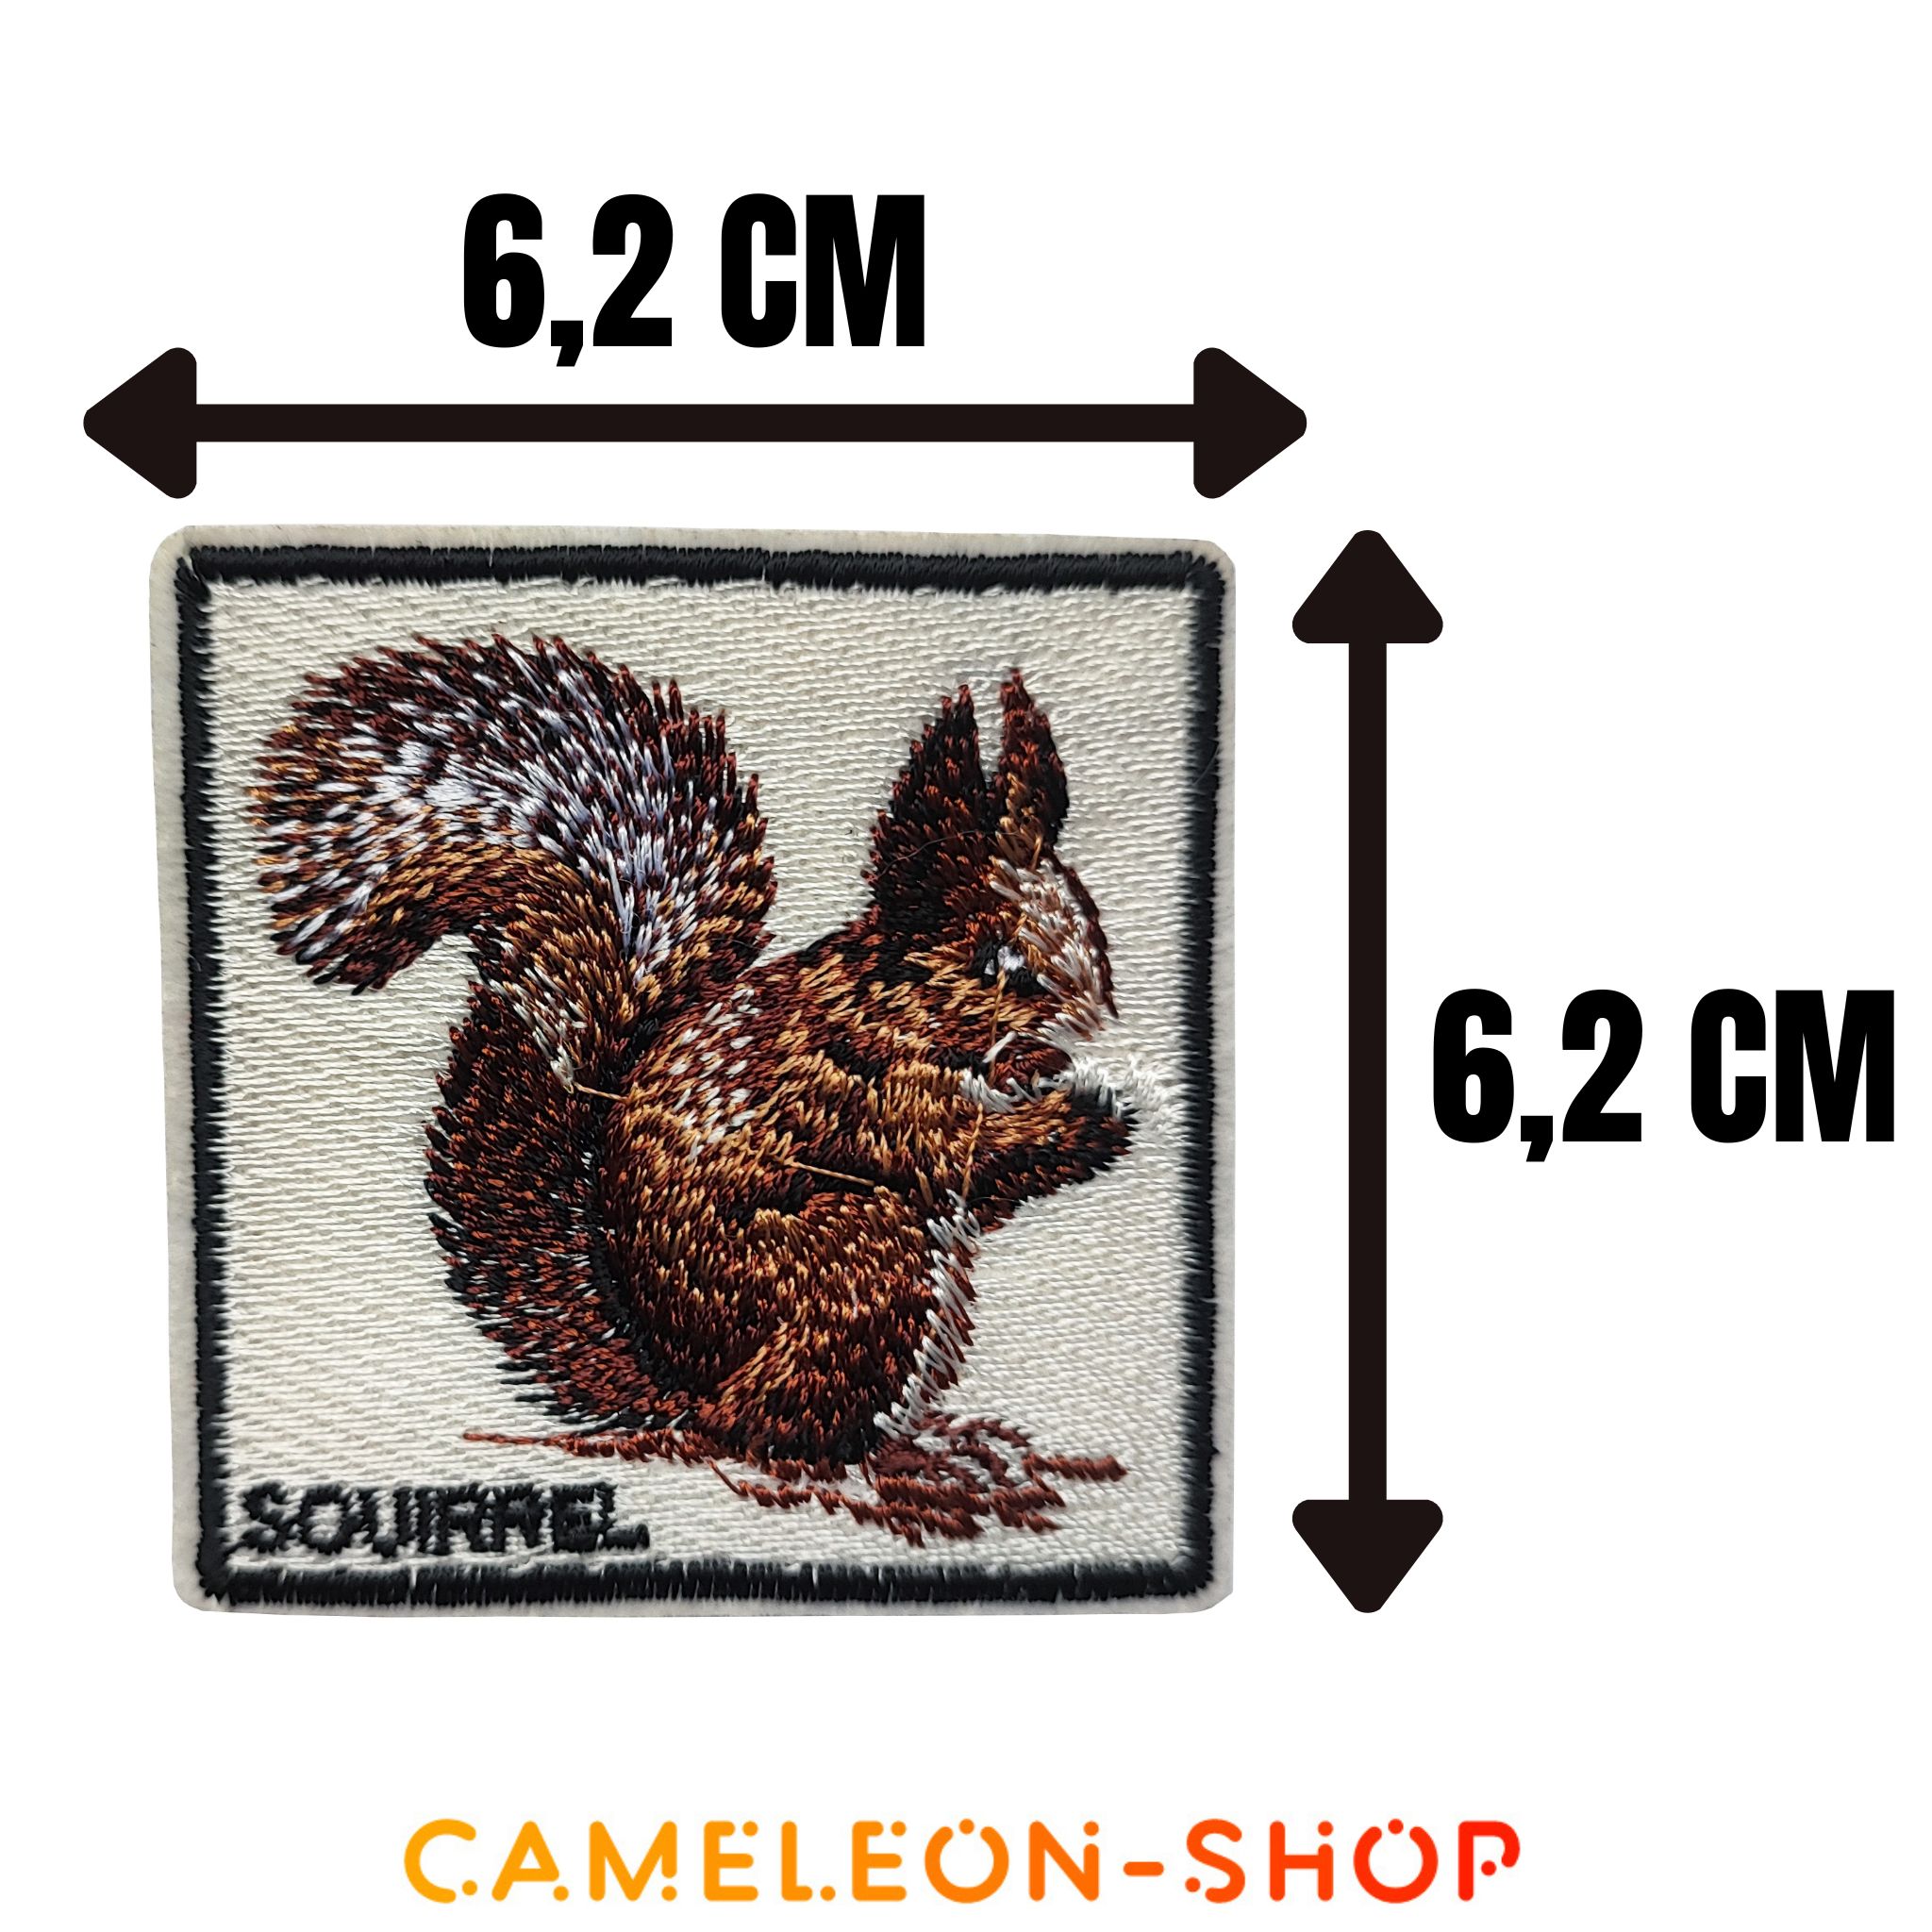 PAT1284 - Patch thermocollant animal ecureuil thermocollant 2